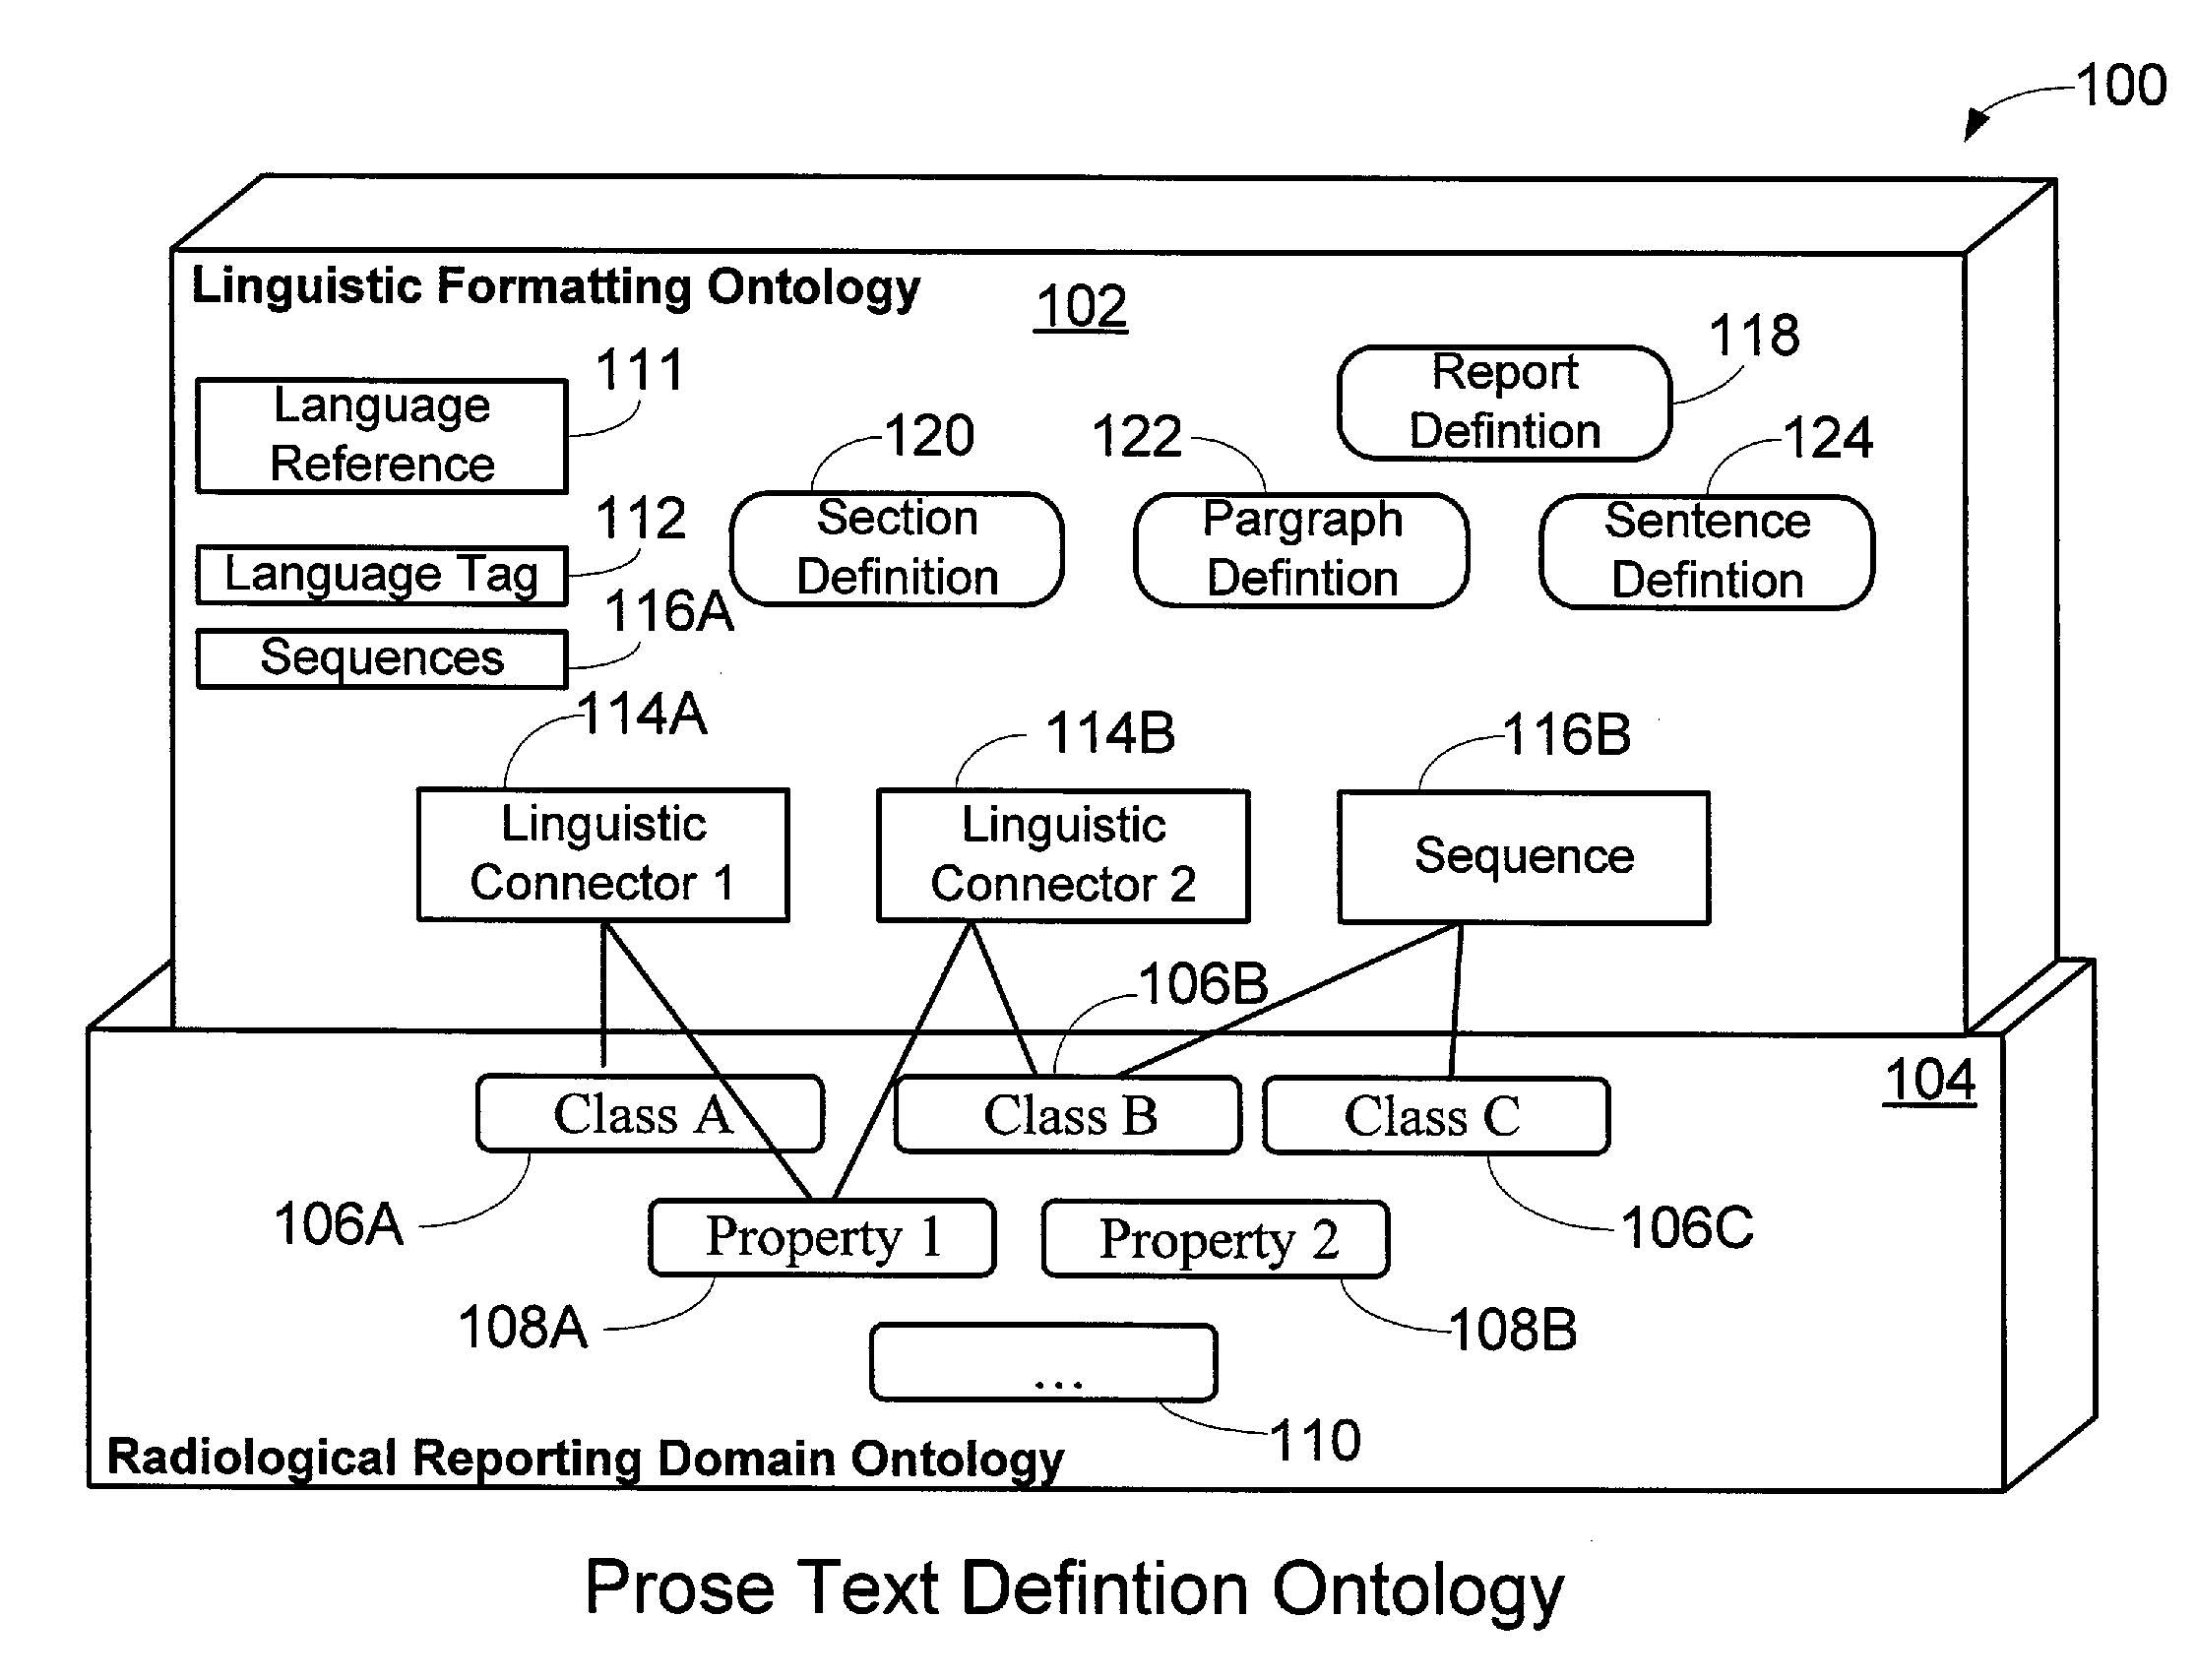 System and Method for Generating Radiological Prose Text Utilizing Radiological Prose Text Definition Ontology